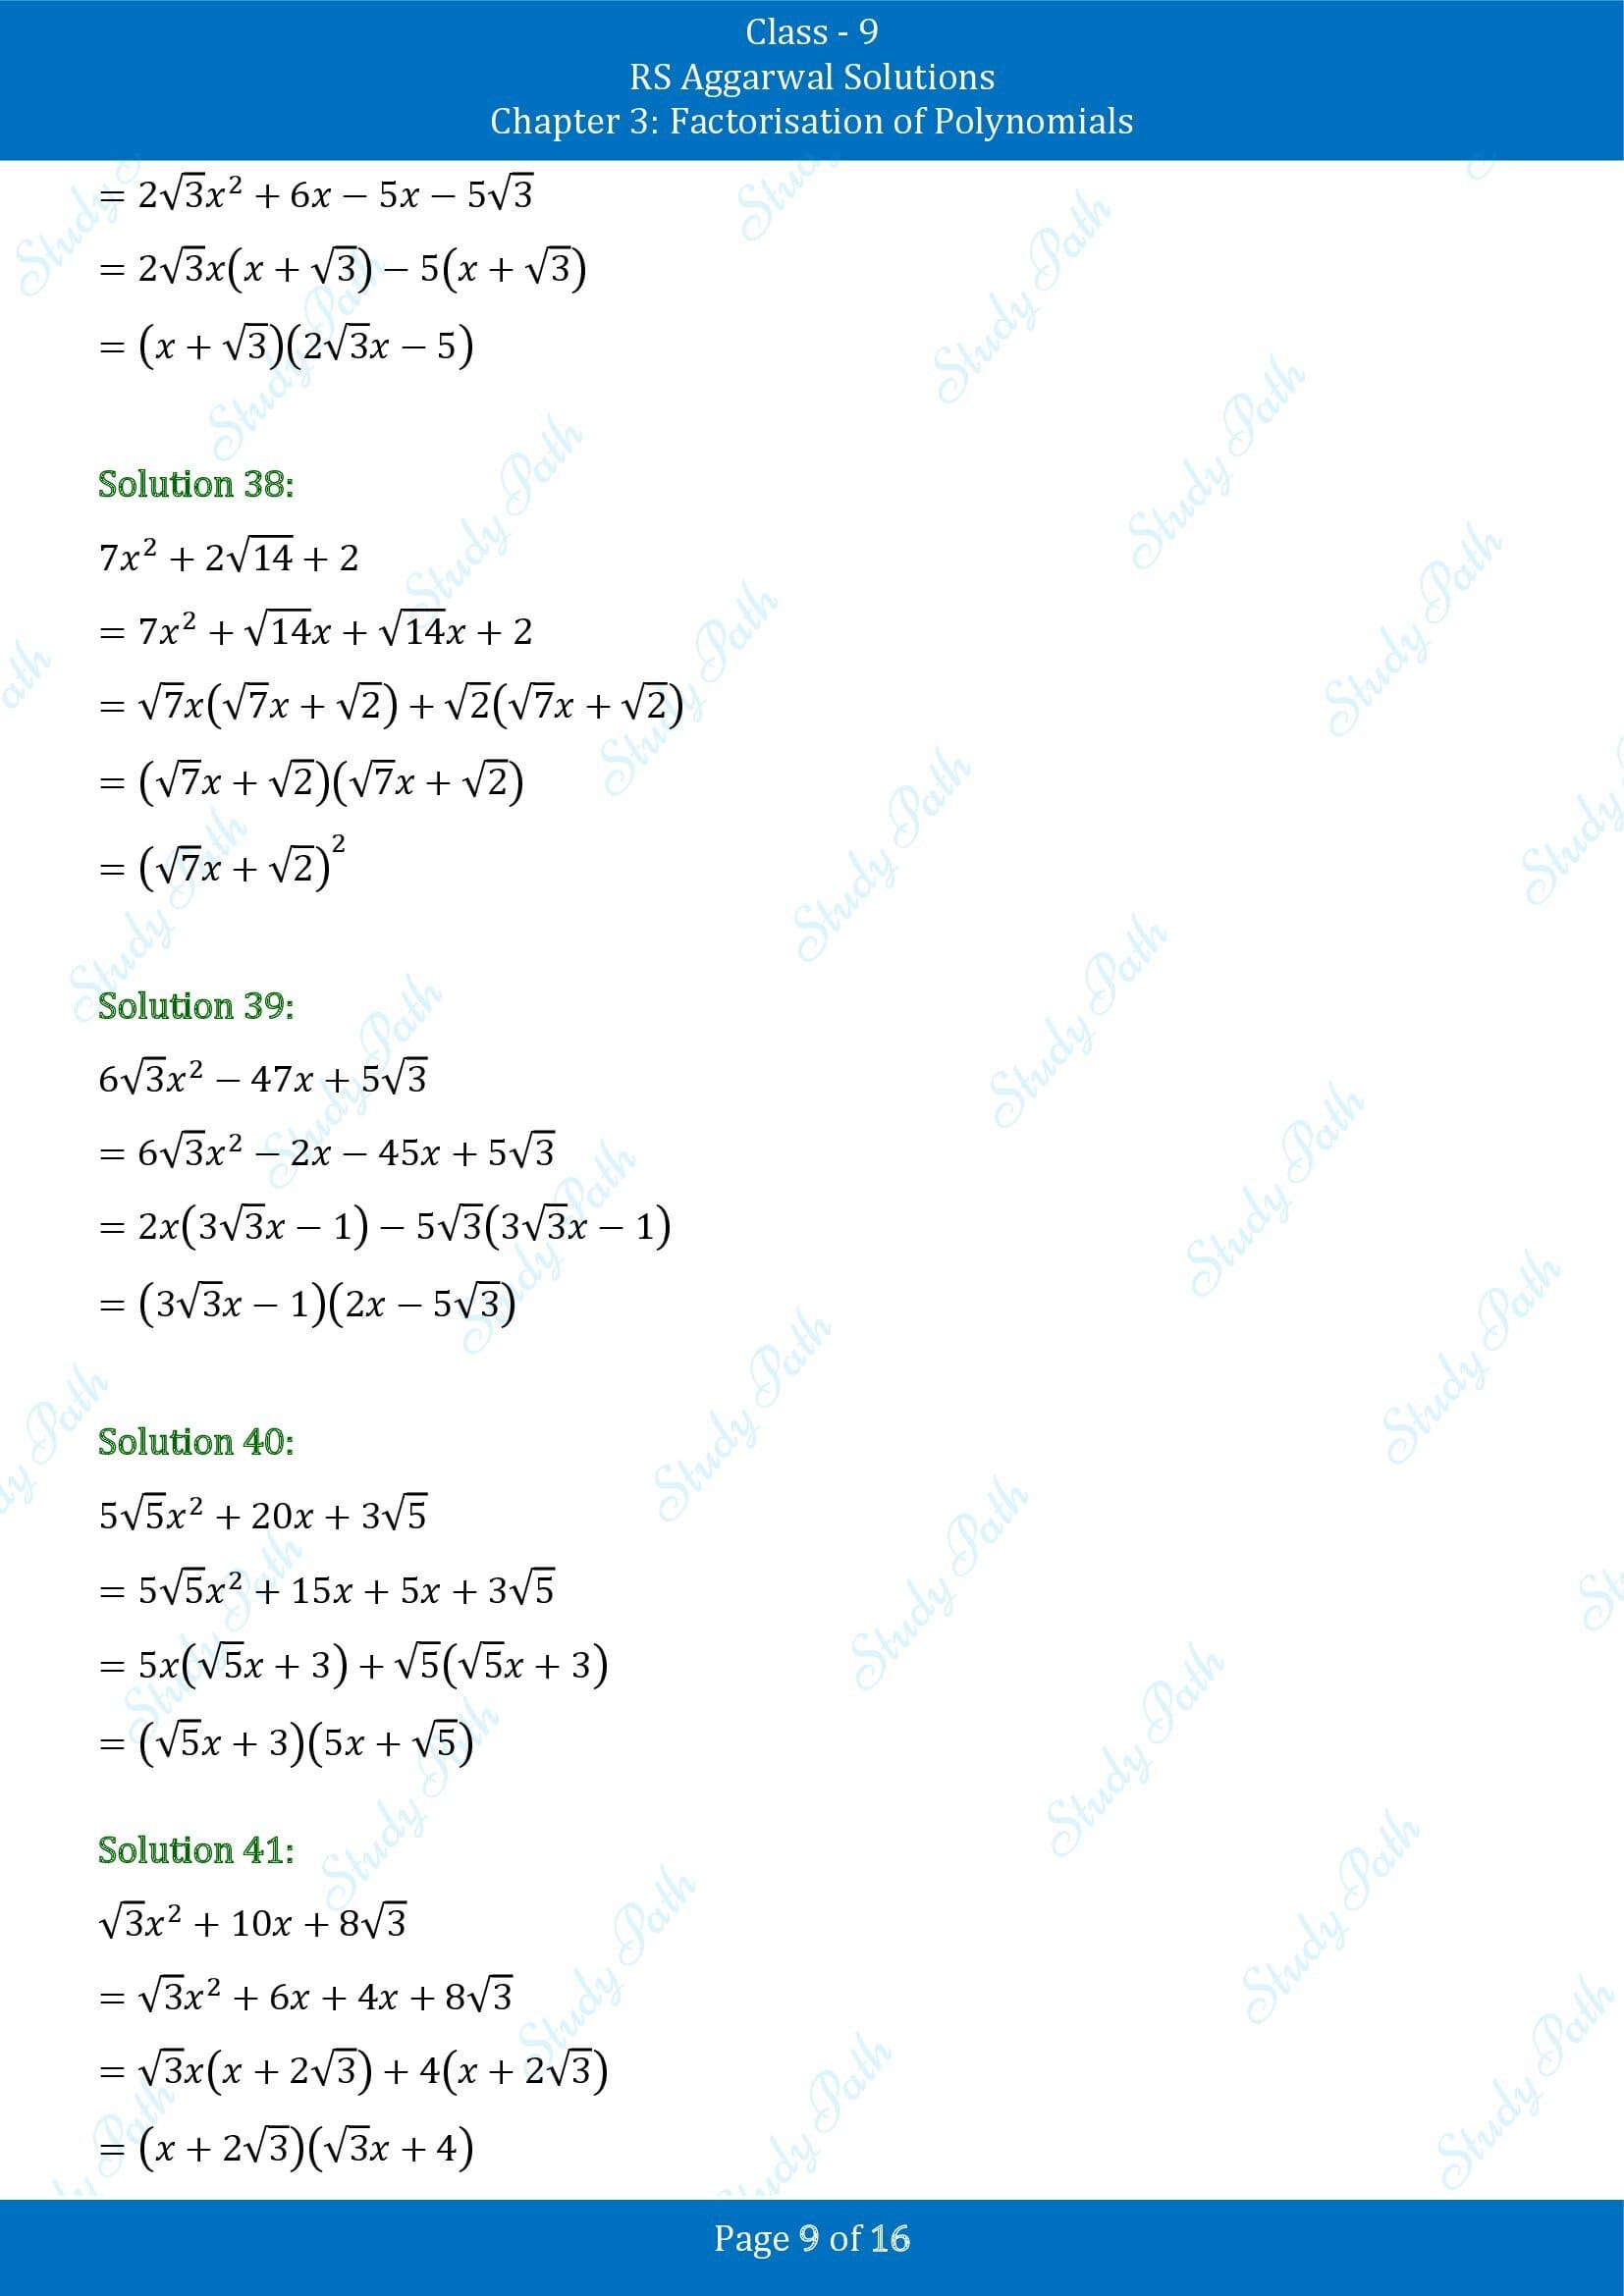 RS Aggarwal Solutions Class 9 Chapter 3 Factorisation of Polynomials Exercise 3C 00009